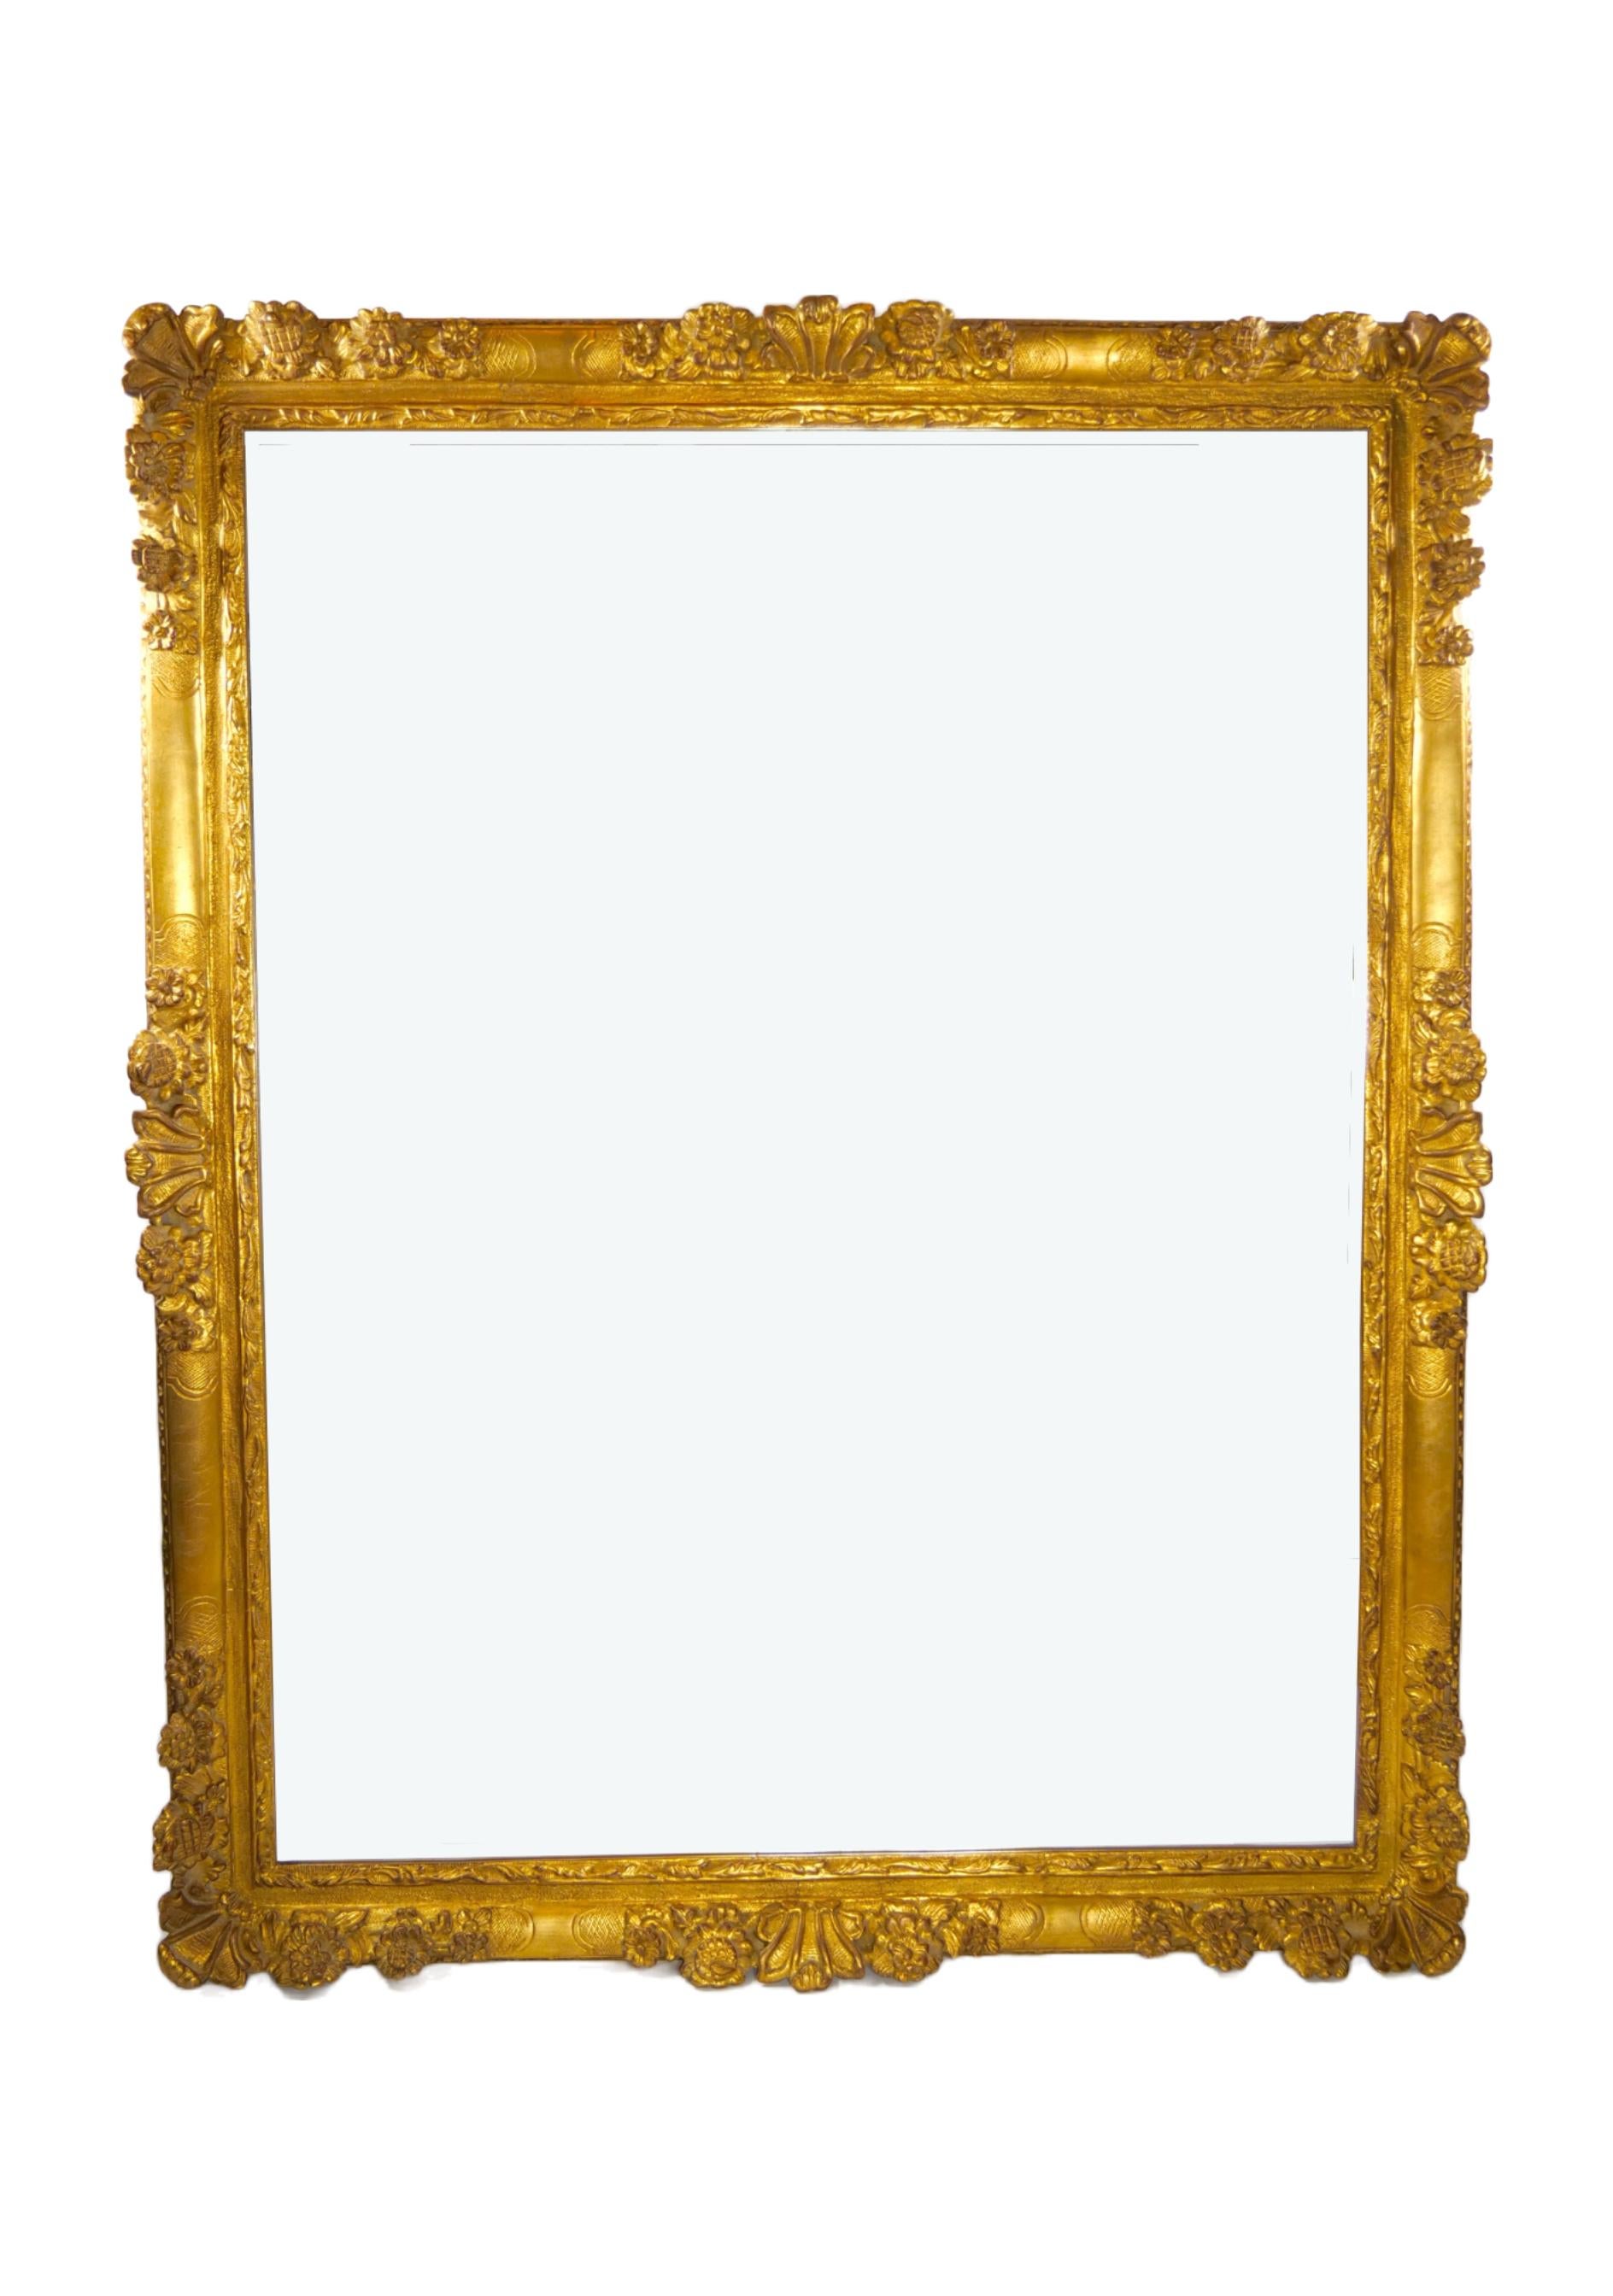 20th Century Large Louis XVI Style Gilt Wood Frame Hanging Wall Mirror For Sale